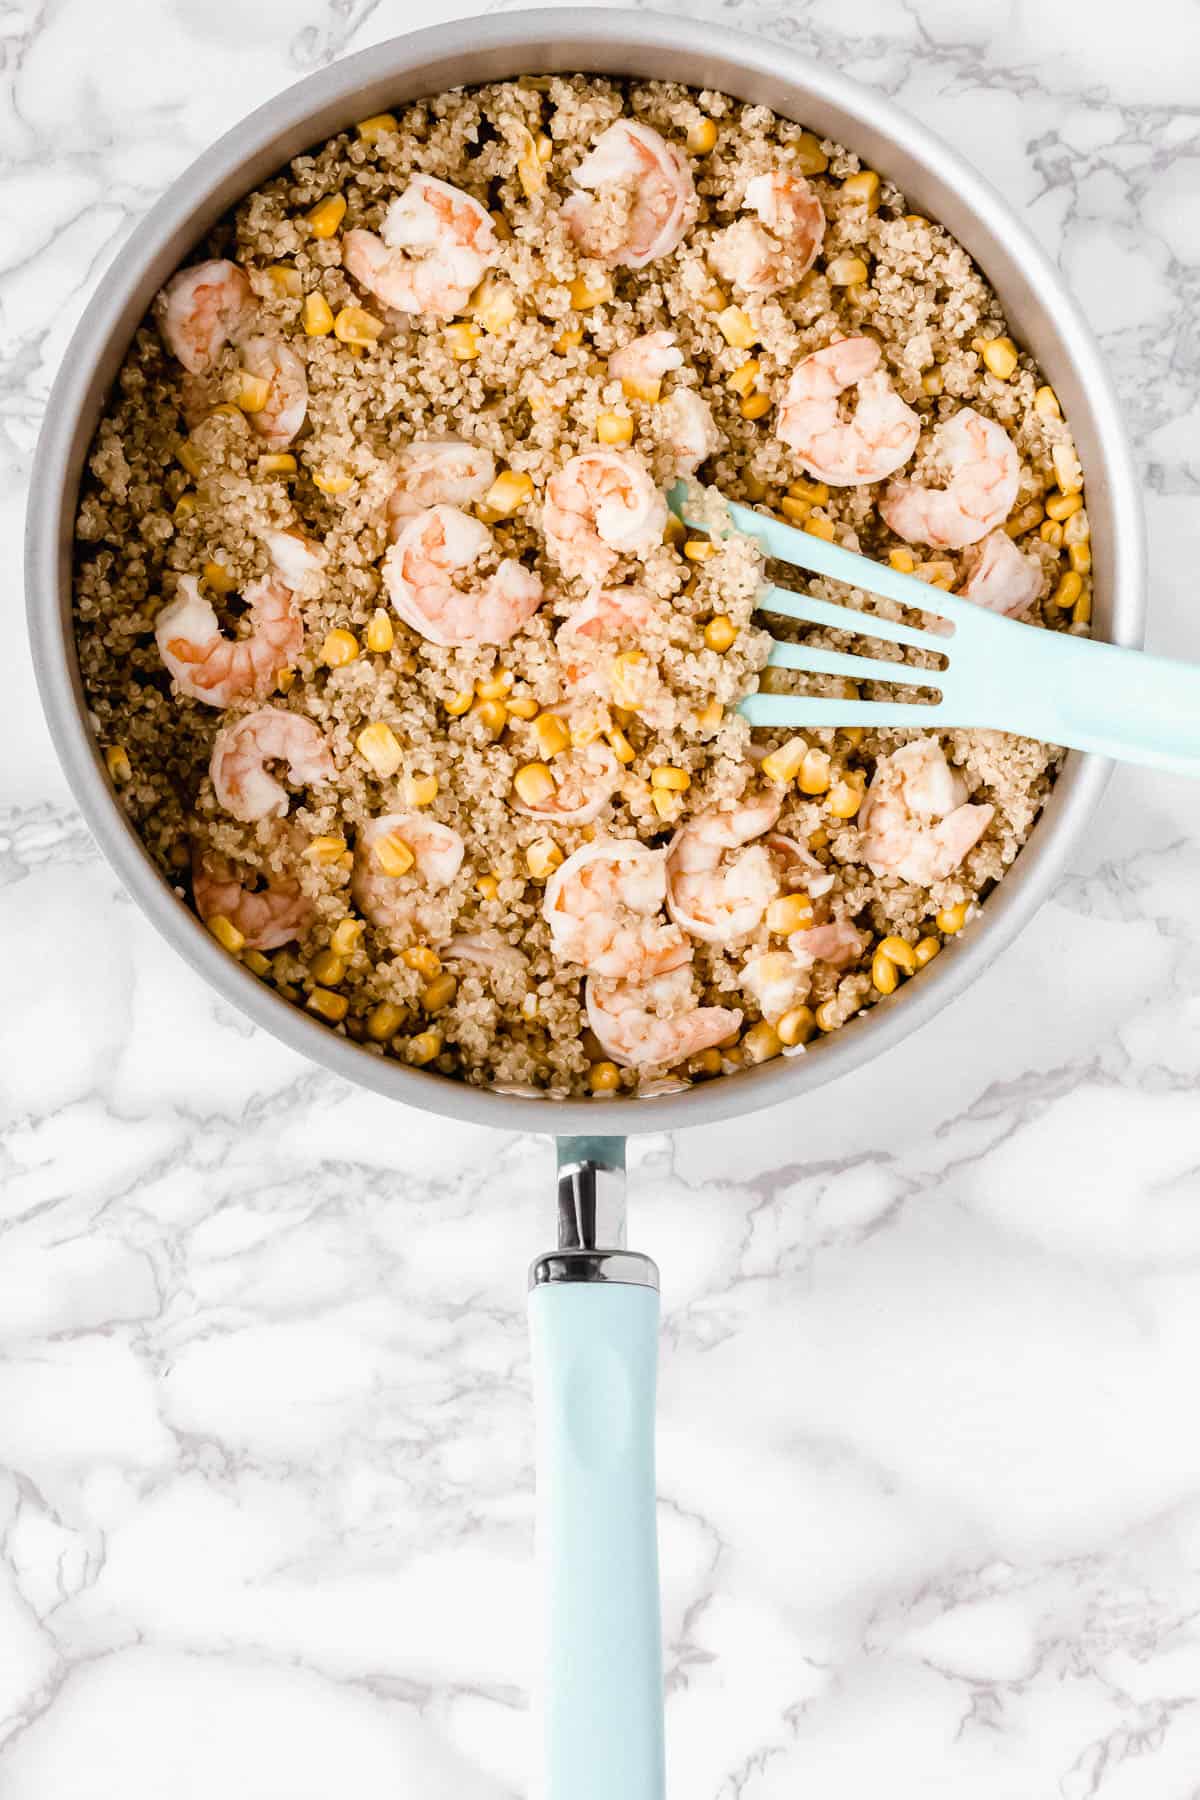 Shrimp and quinoa salad in a skillet with a teal turner in it over a marble background